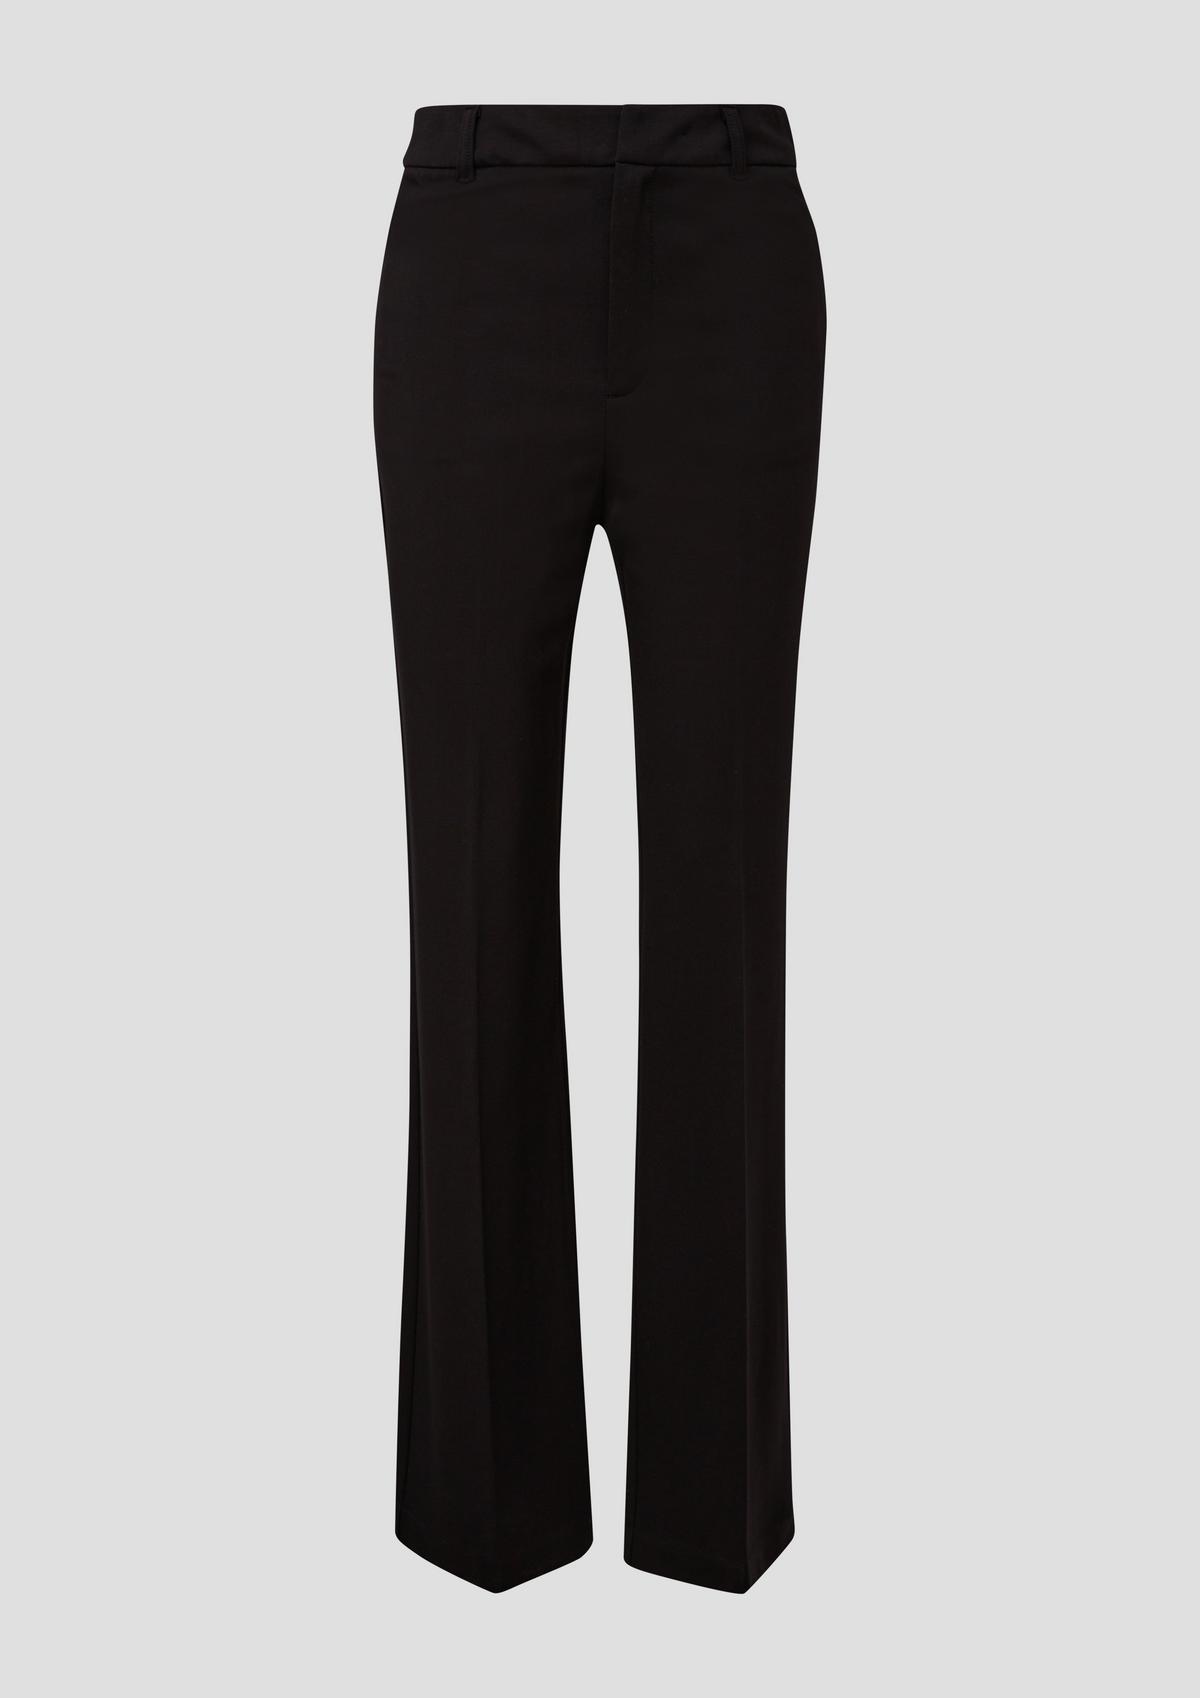 s.Oliver Interlock jersey trousers with a straight leg